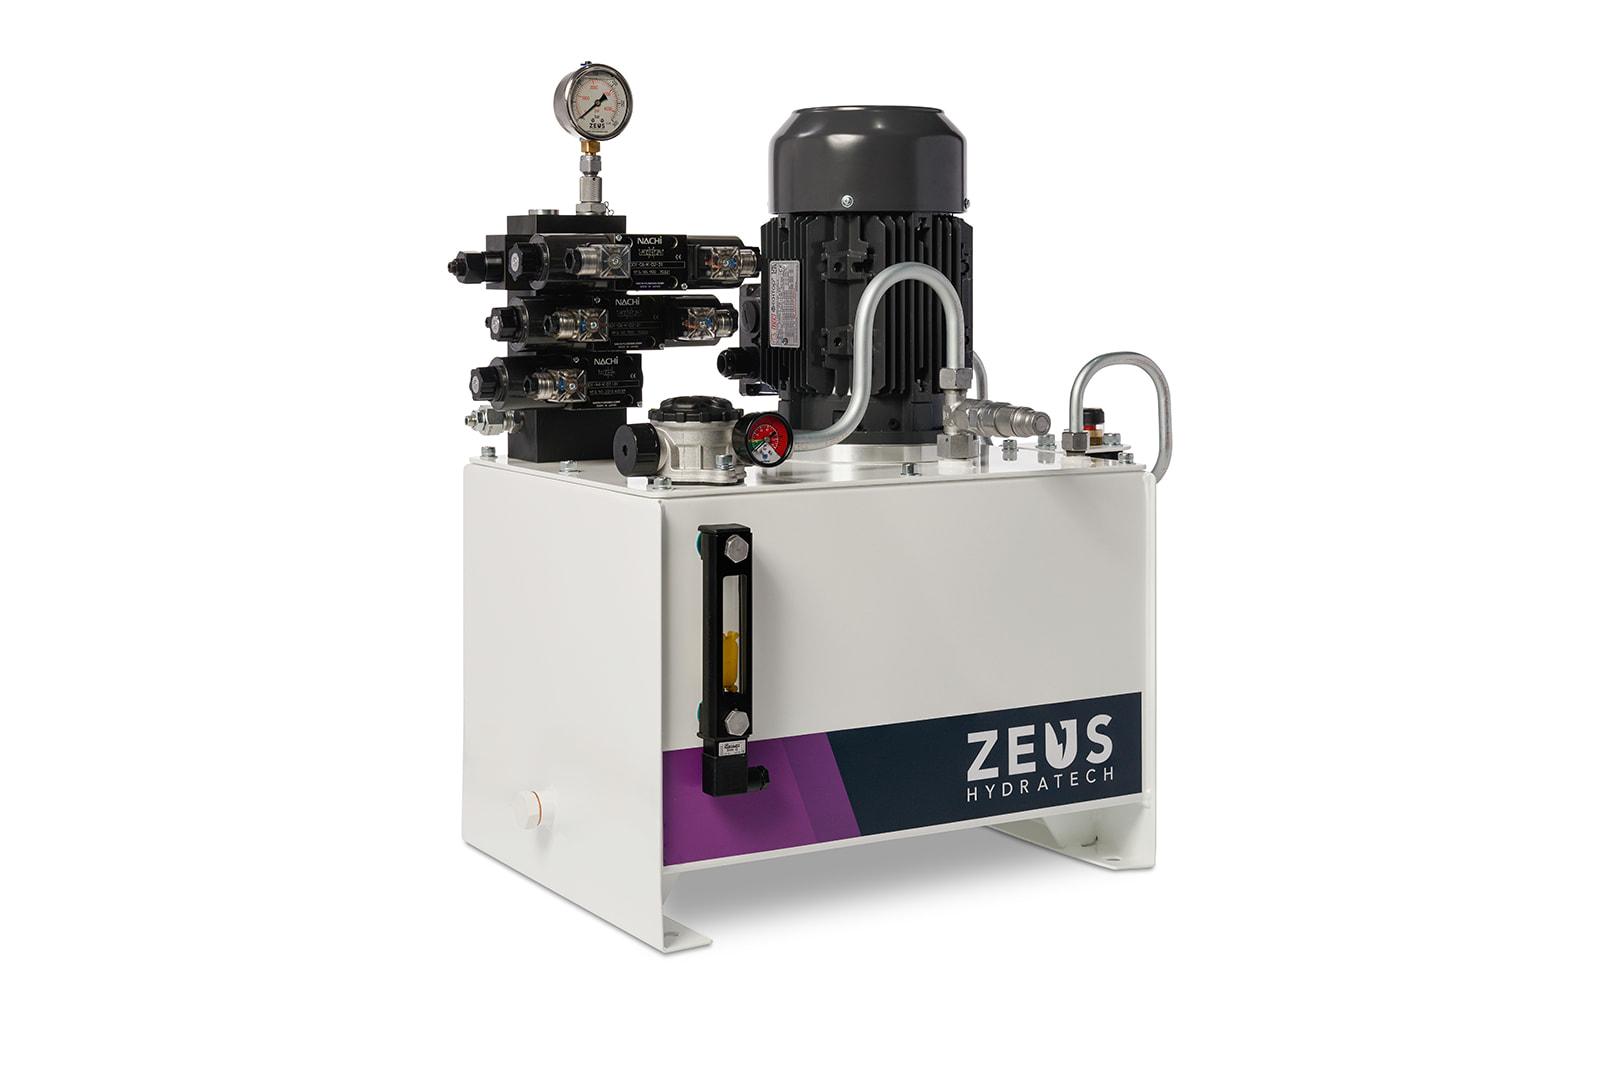 This is an image of an Industrial Hydraulic Power Unit, manufactured by Zeus Hydratech.